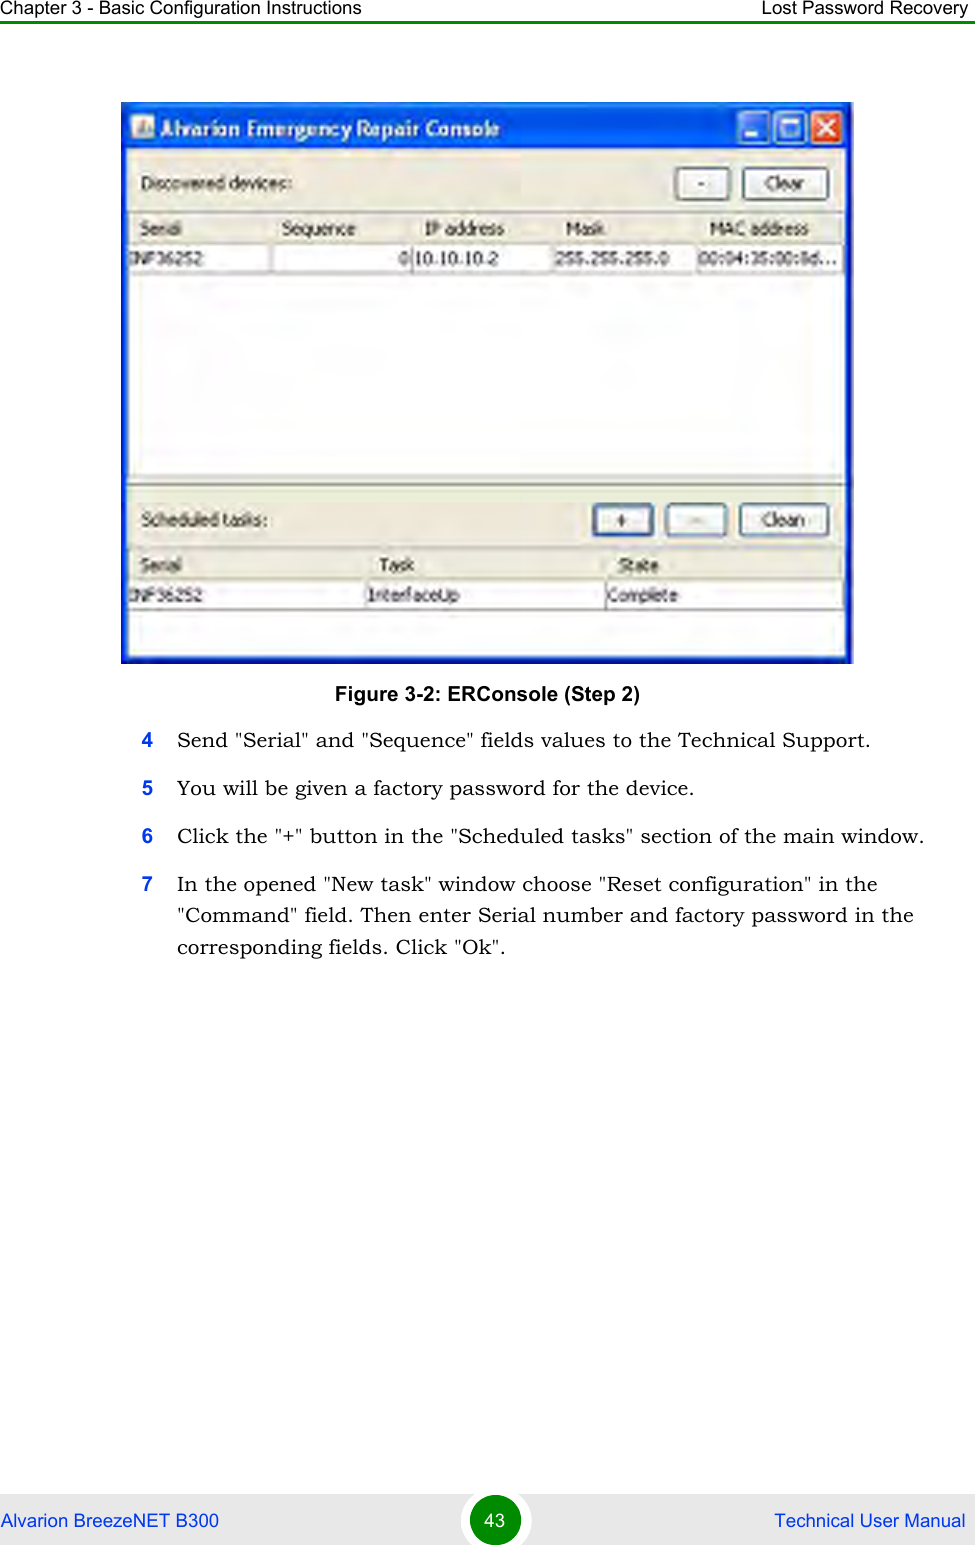 Chapter 3 - Basic Configuration Instructions Lost Password RecoveryAlvarion BreezeNET B300 43  Technical User Manual4Send &quot;Serial&quot; and &quot;Sequence&quot; fields values to the Technical Support.5You will be given a factory password for the device.6Click the &quot;+&quot; button in the &quot;Scheduled tasks&quot; section of the main window.7In the opened &quot;New task&quot; window choose &quot;Reset configuration&quot; in the &quot;Command&quot; field. Then enter Serial number and factory password in the corresponding fields. Click &quot;Ok&quot;.Figure 3-2: ERConsole (Step 2)